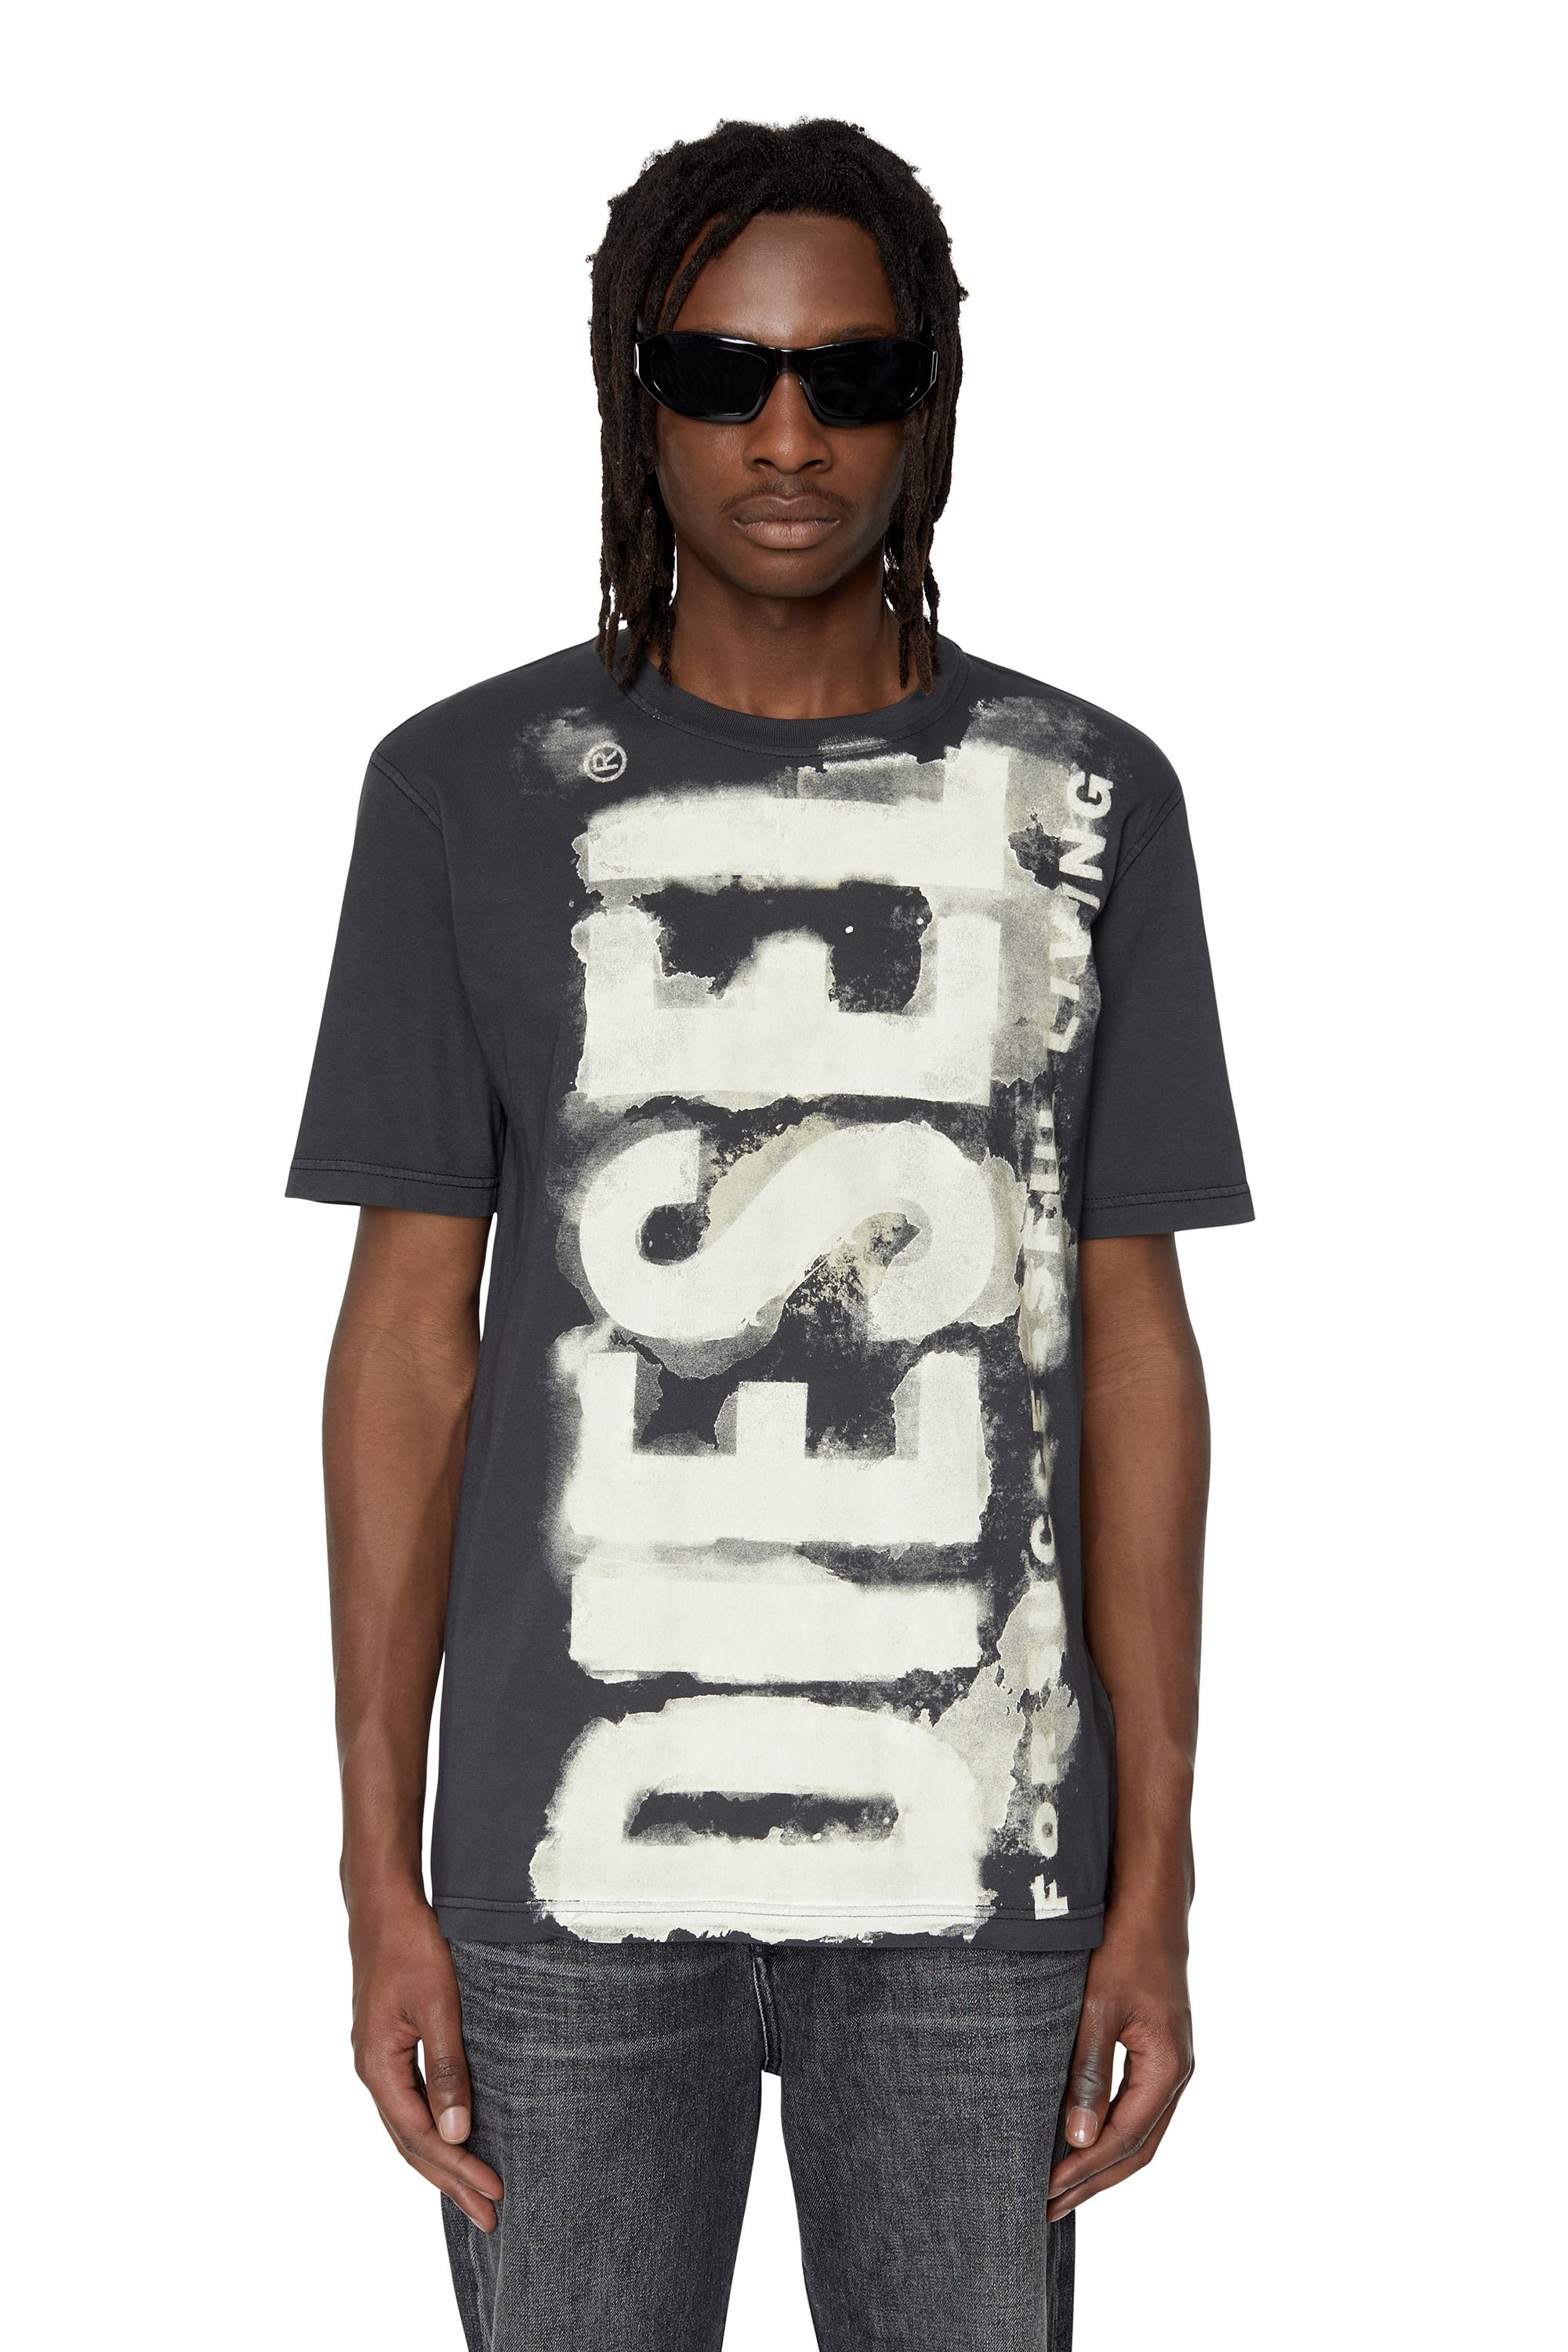 Homme Vêtements Diesel Homme Tee-shirts & Polos Diesel Homme Tee-shirts Diesel Homme L gris Tee-shirt DIESEL 3 Tee-shirts Diesel Homme 